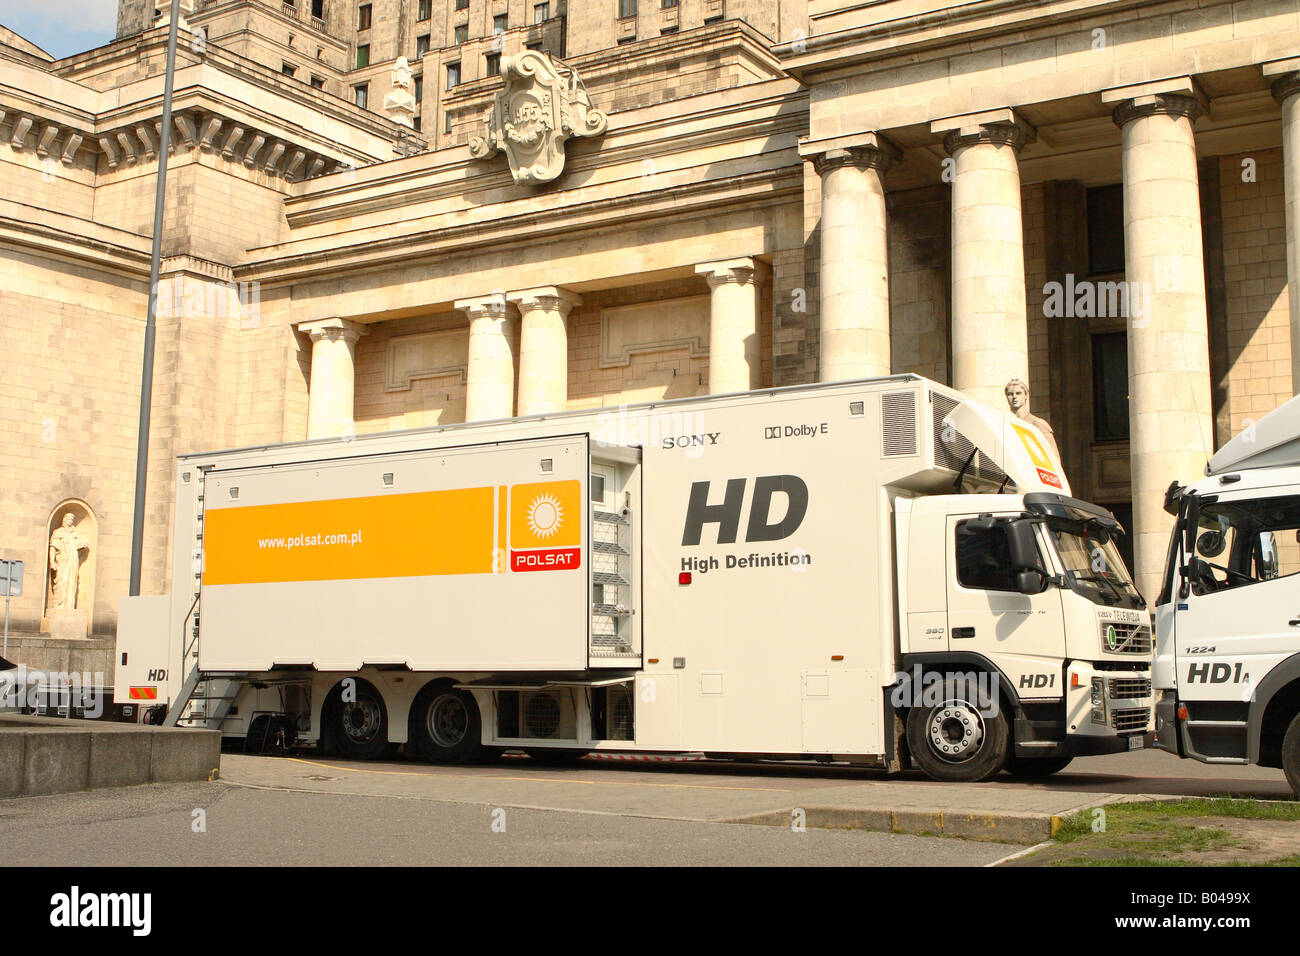 Television TV outside broadcast High Definition mobile studio vehicle for the Polsat company in Warsaw Poland Stock Photo